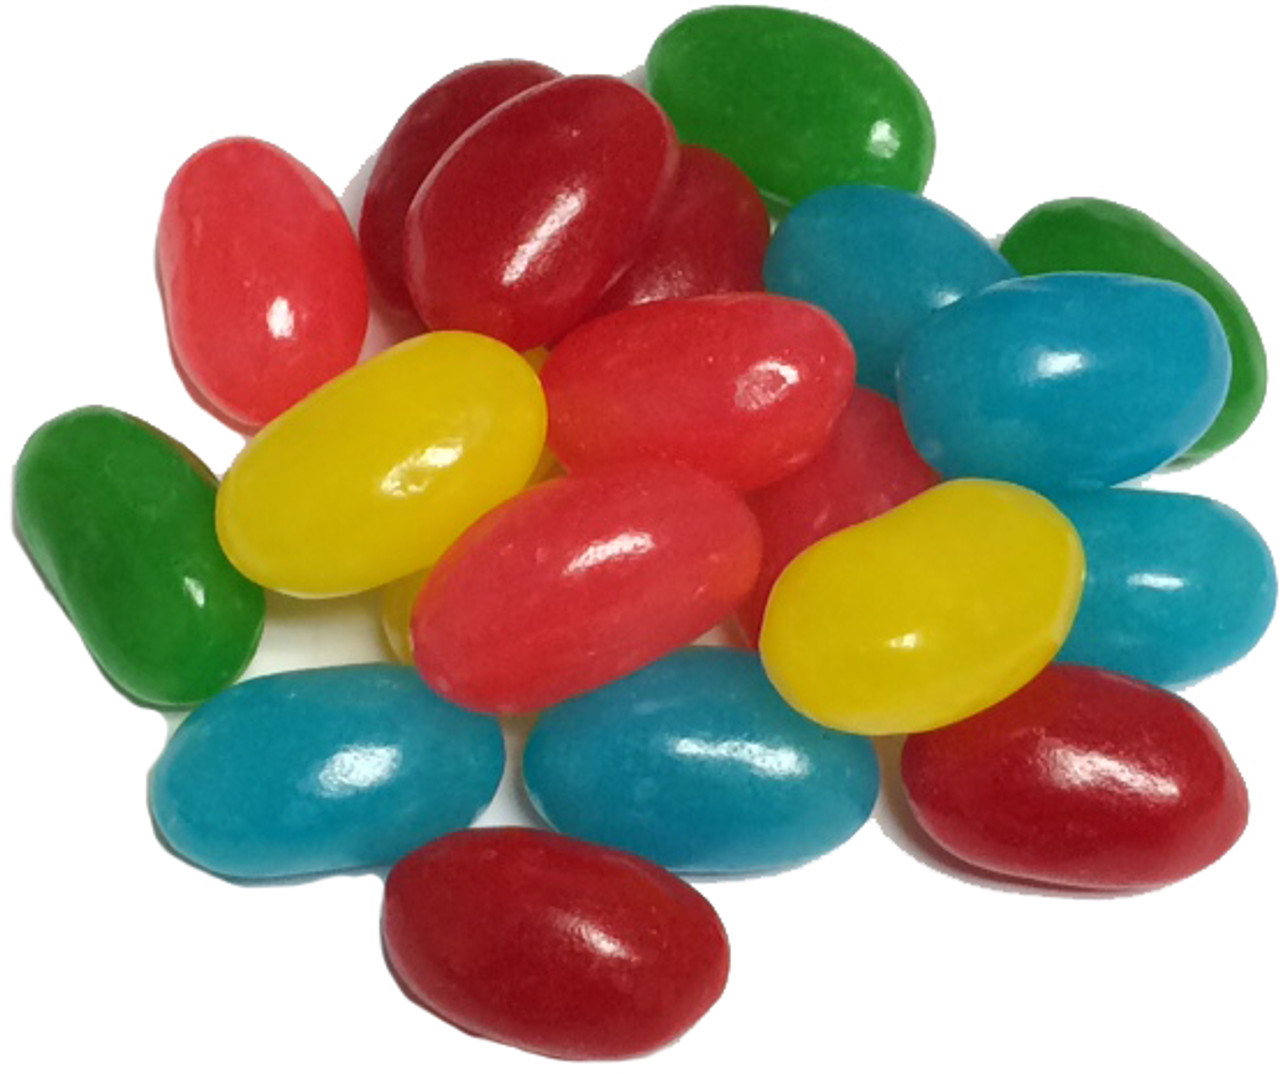 Image result for jelly beans.